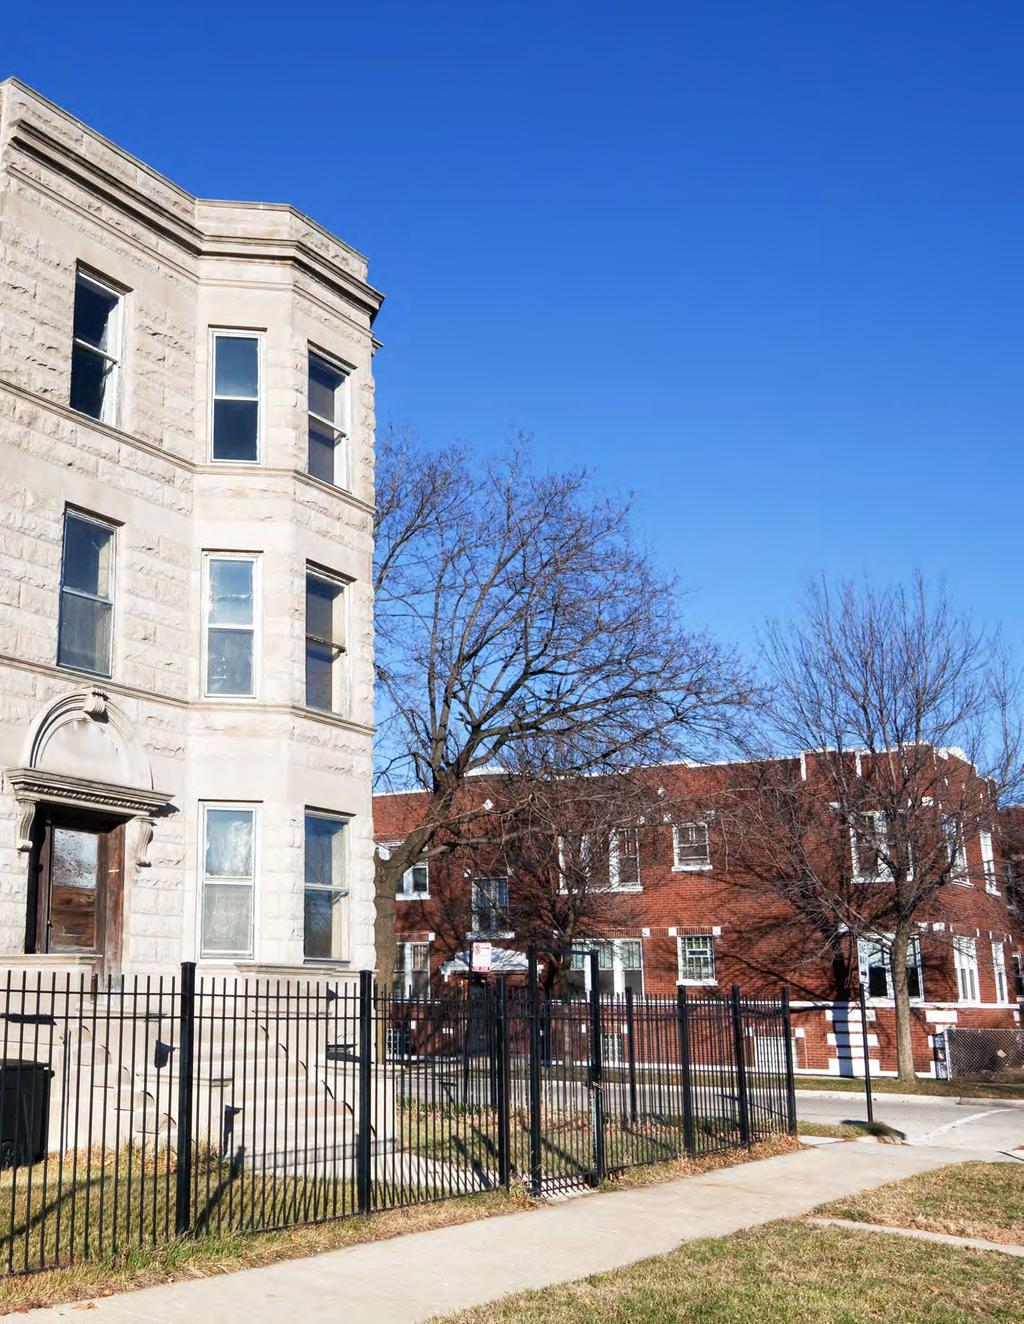 SMALL-SCALE INVESTORS CAN HELP ADDRESS BIG-CITY PROBLEMS Partnering with small-scale private investors to restore troubled one-to-four-unit properties is a